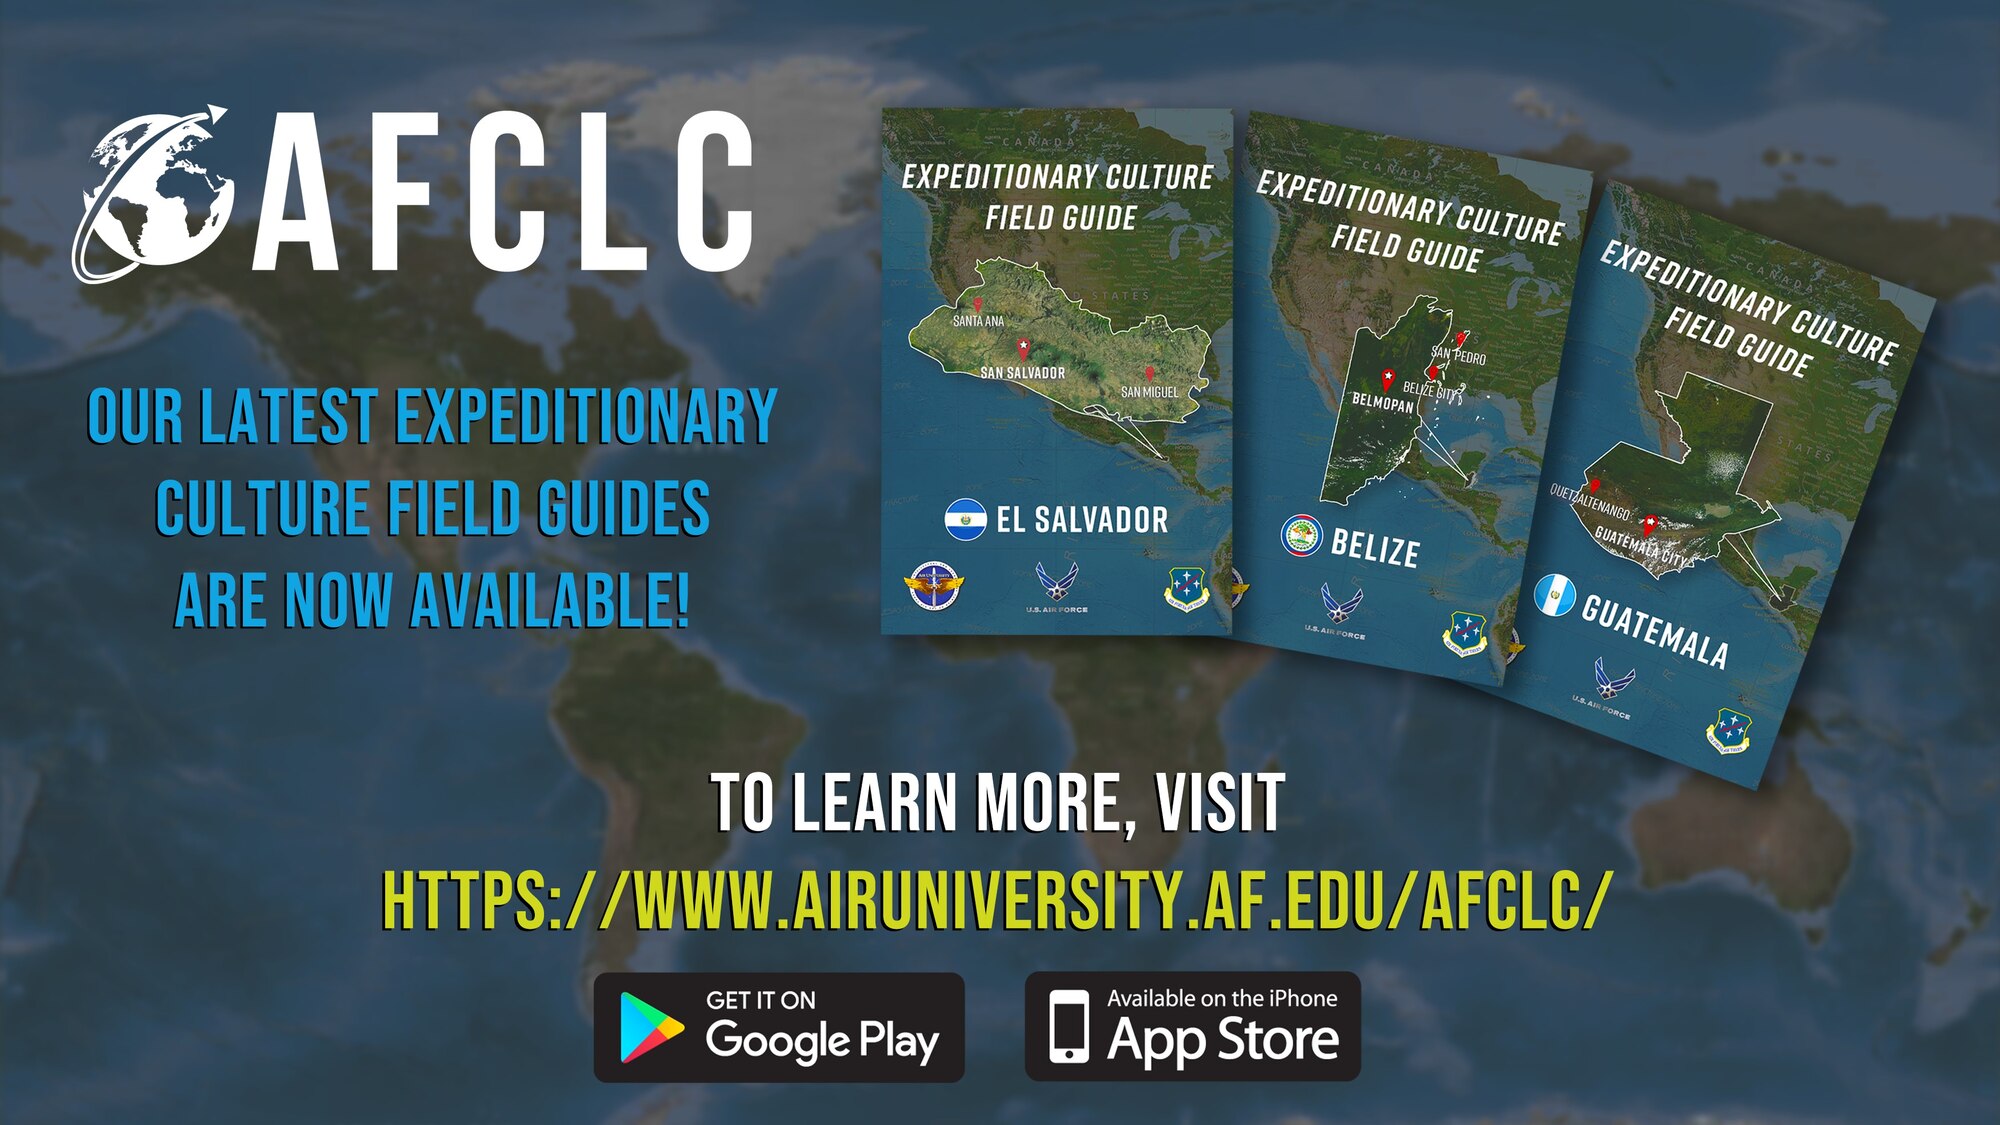 Three South American countries added to AFCLC’s field guide inventory